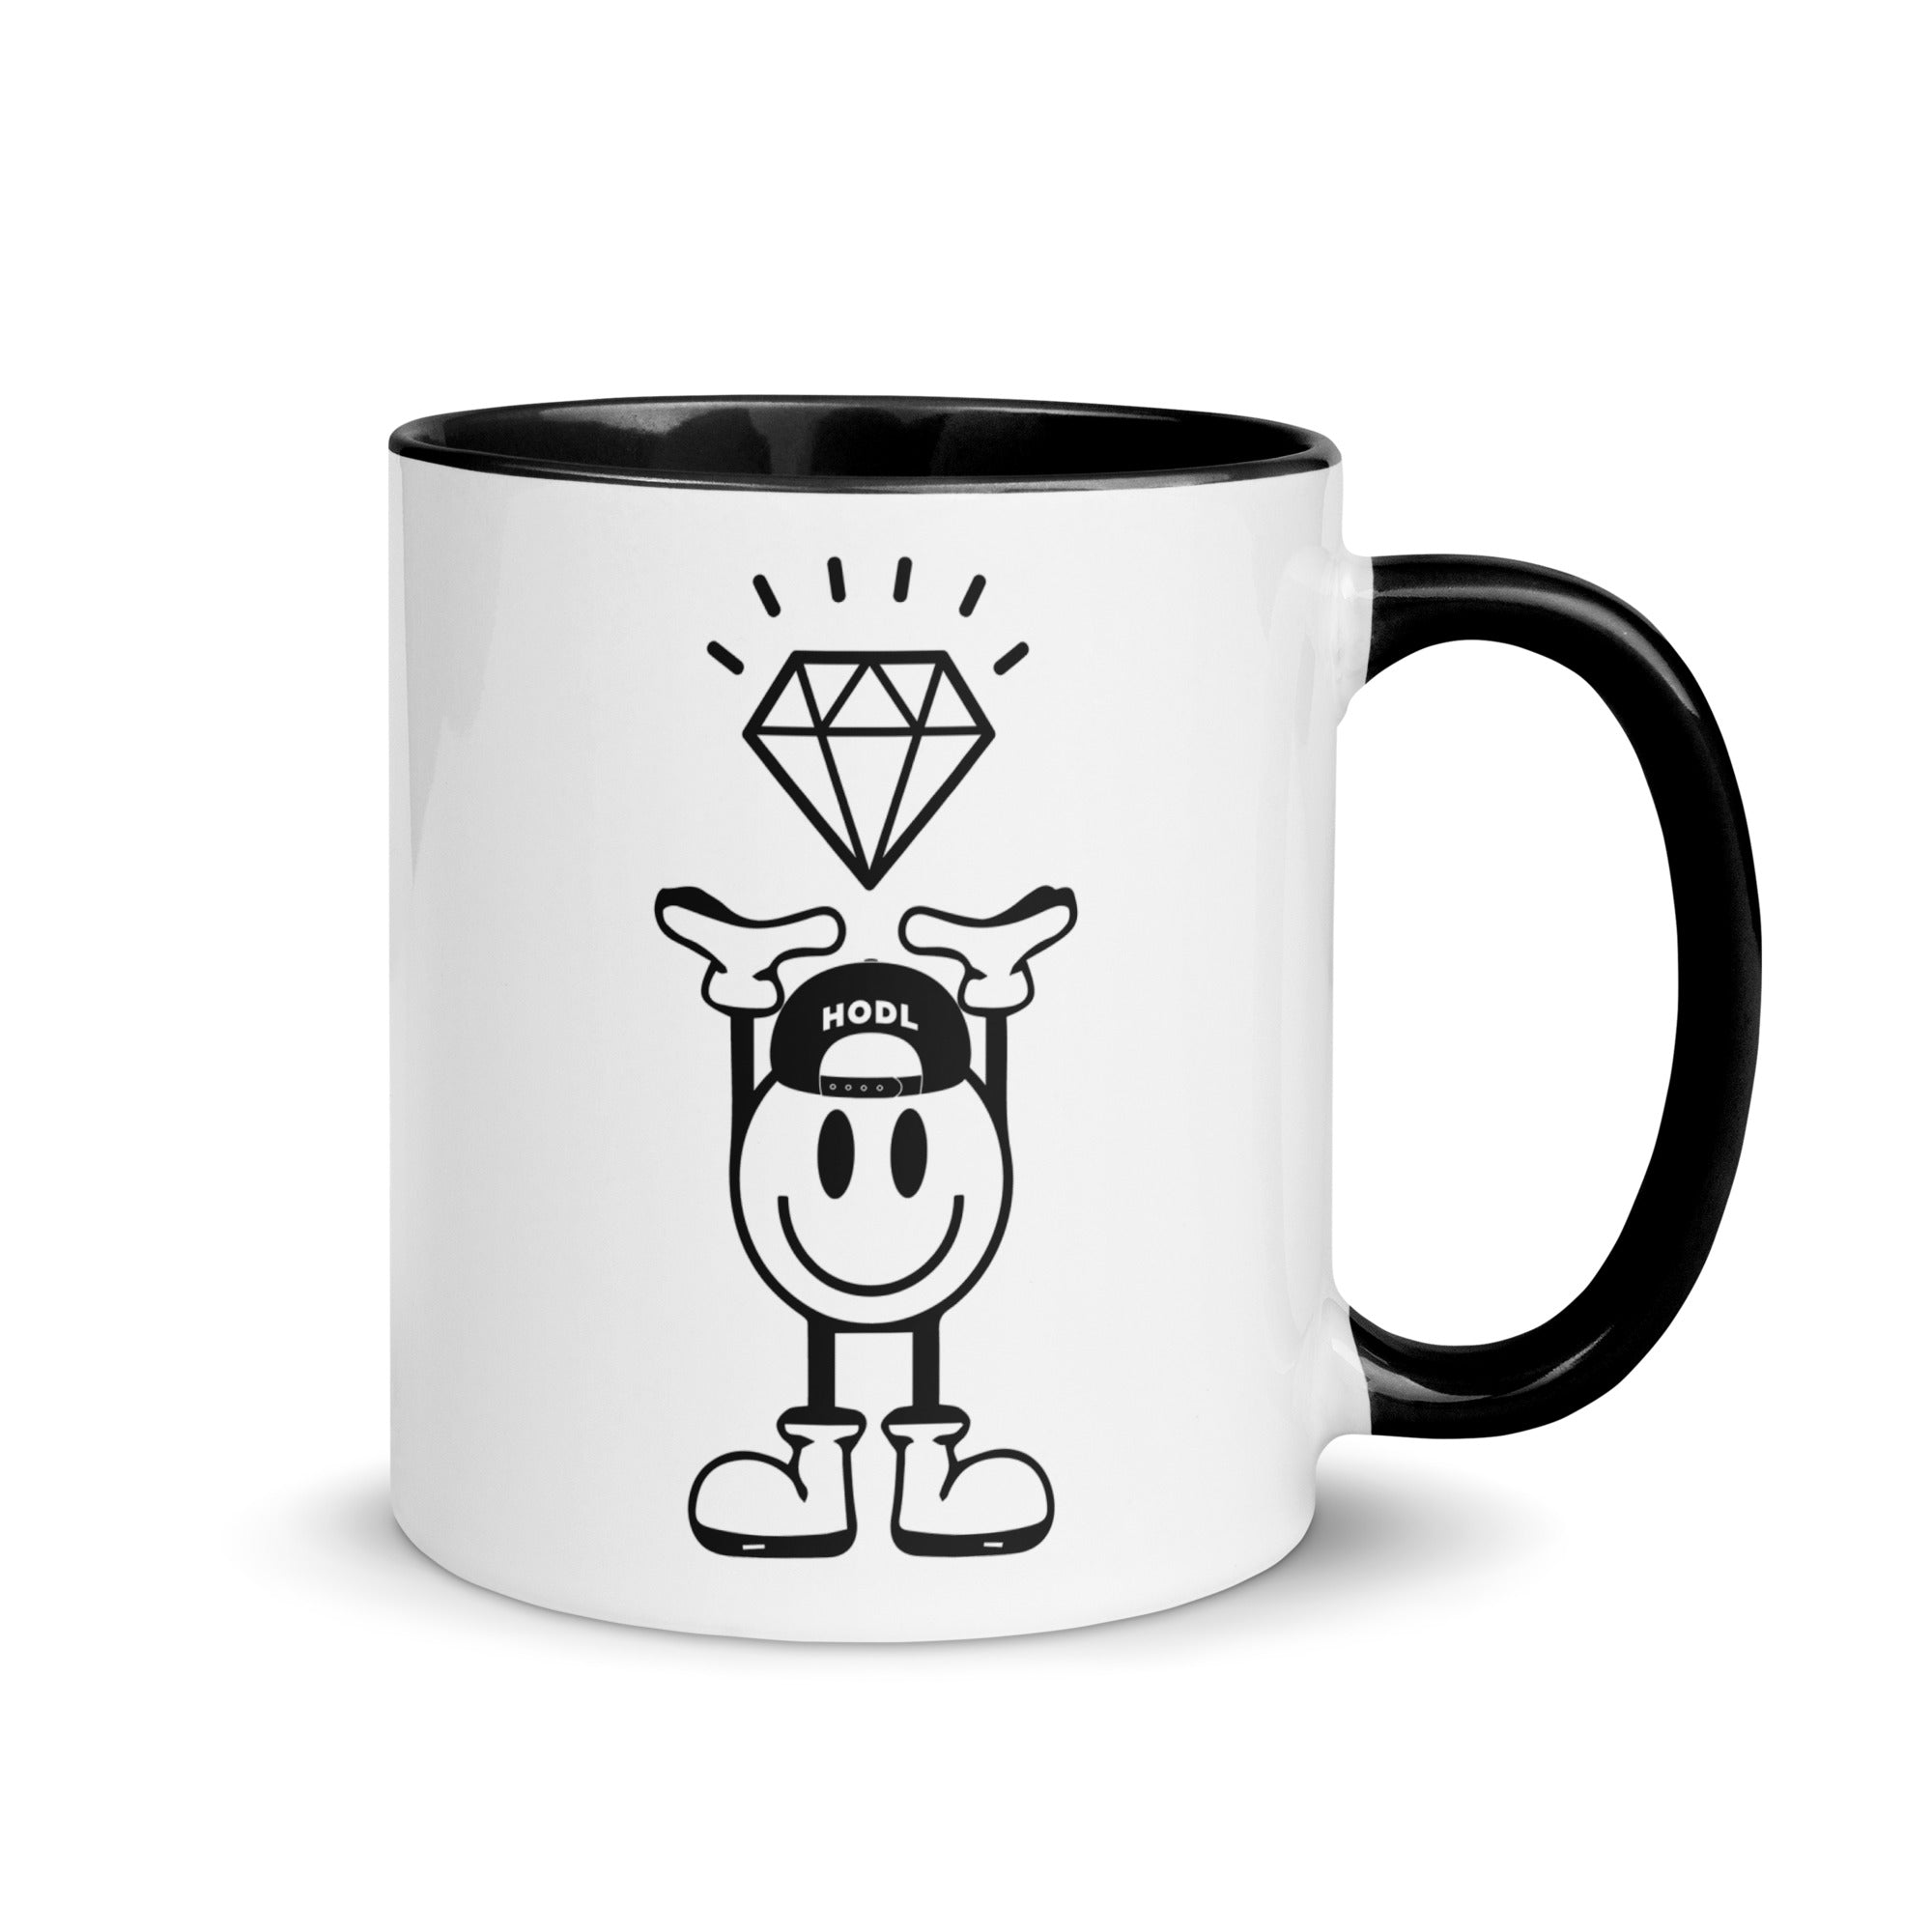 Gifts for Crypto Lovers - Diamond Hands Mugs. Right handle view.